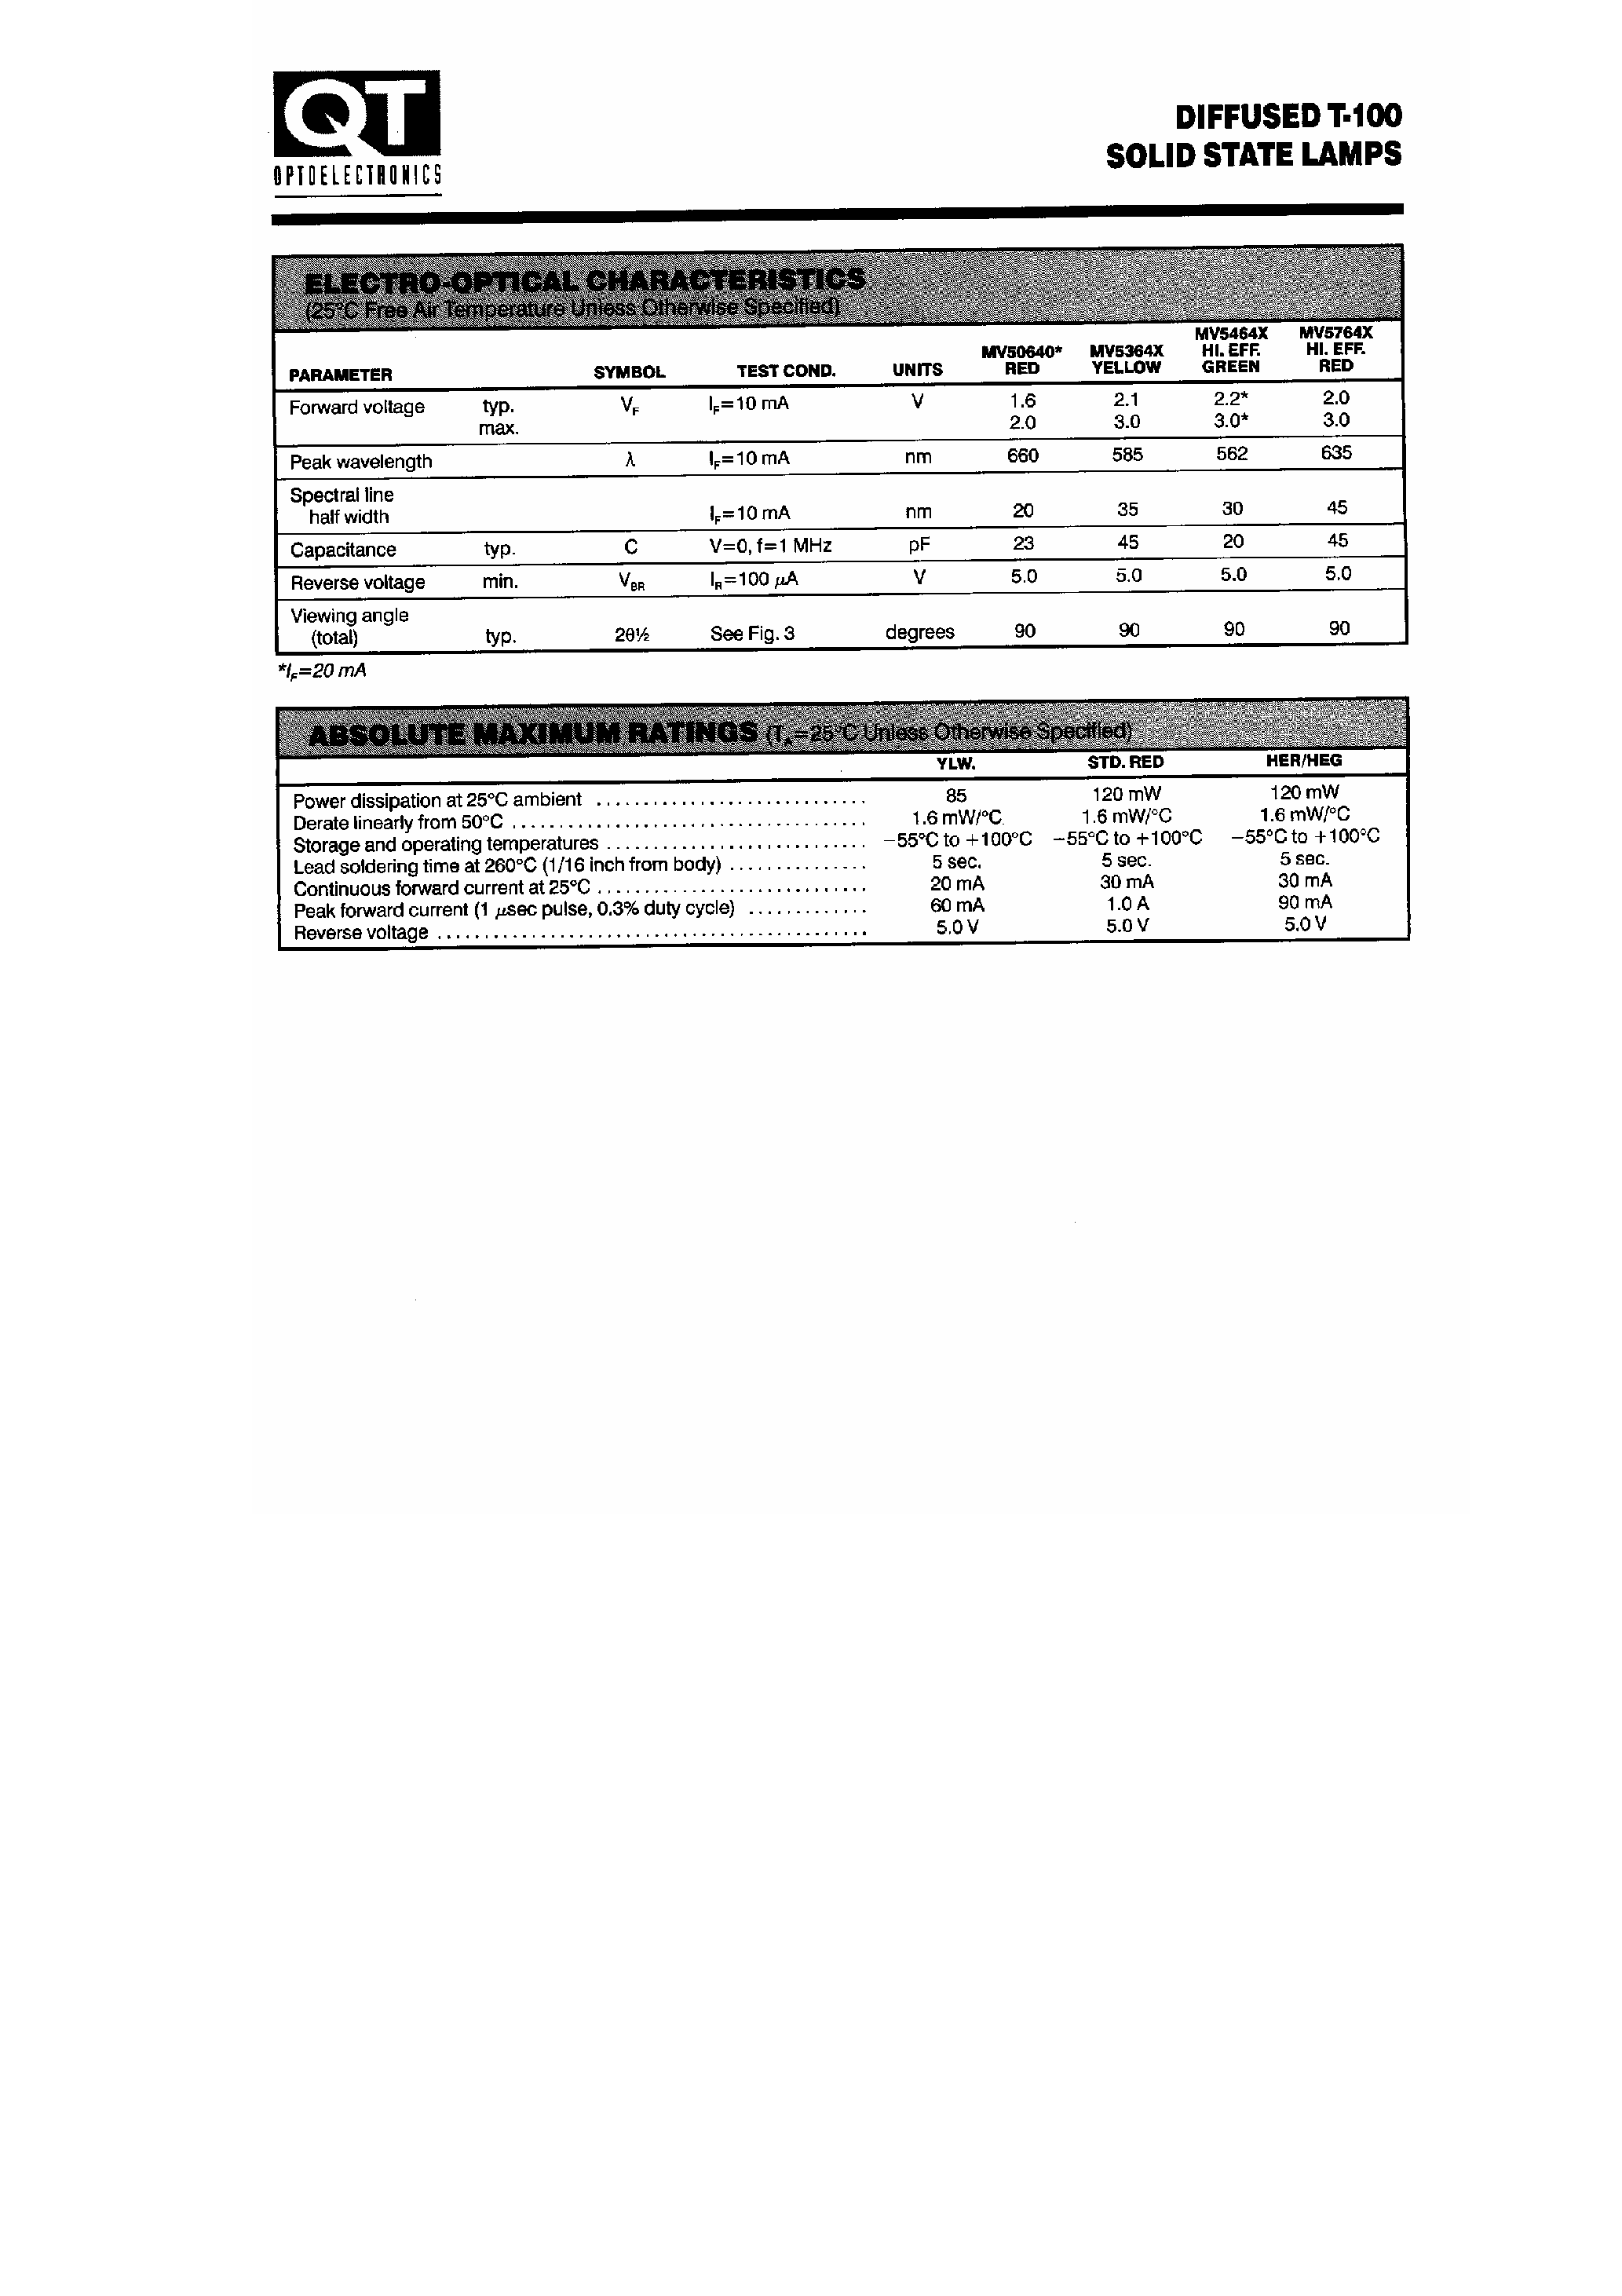 Datasheet HLMP1301 - Diffused T-100 Solid State Lamps page 2